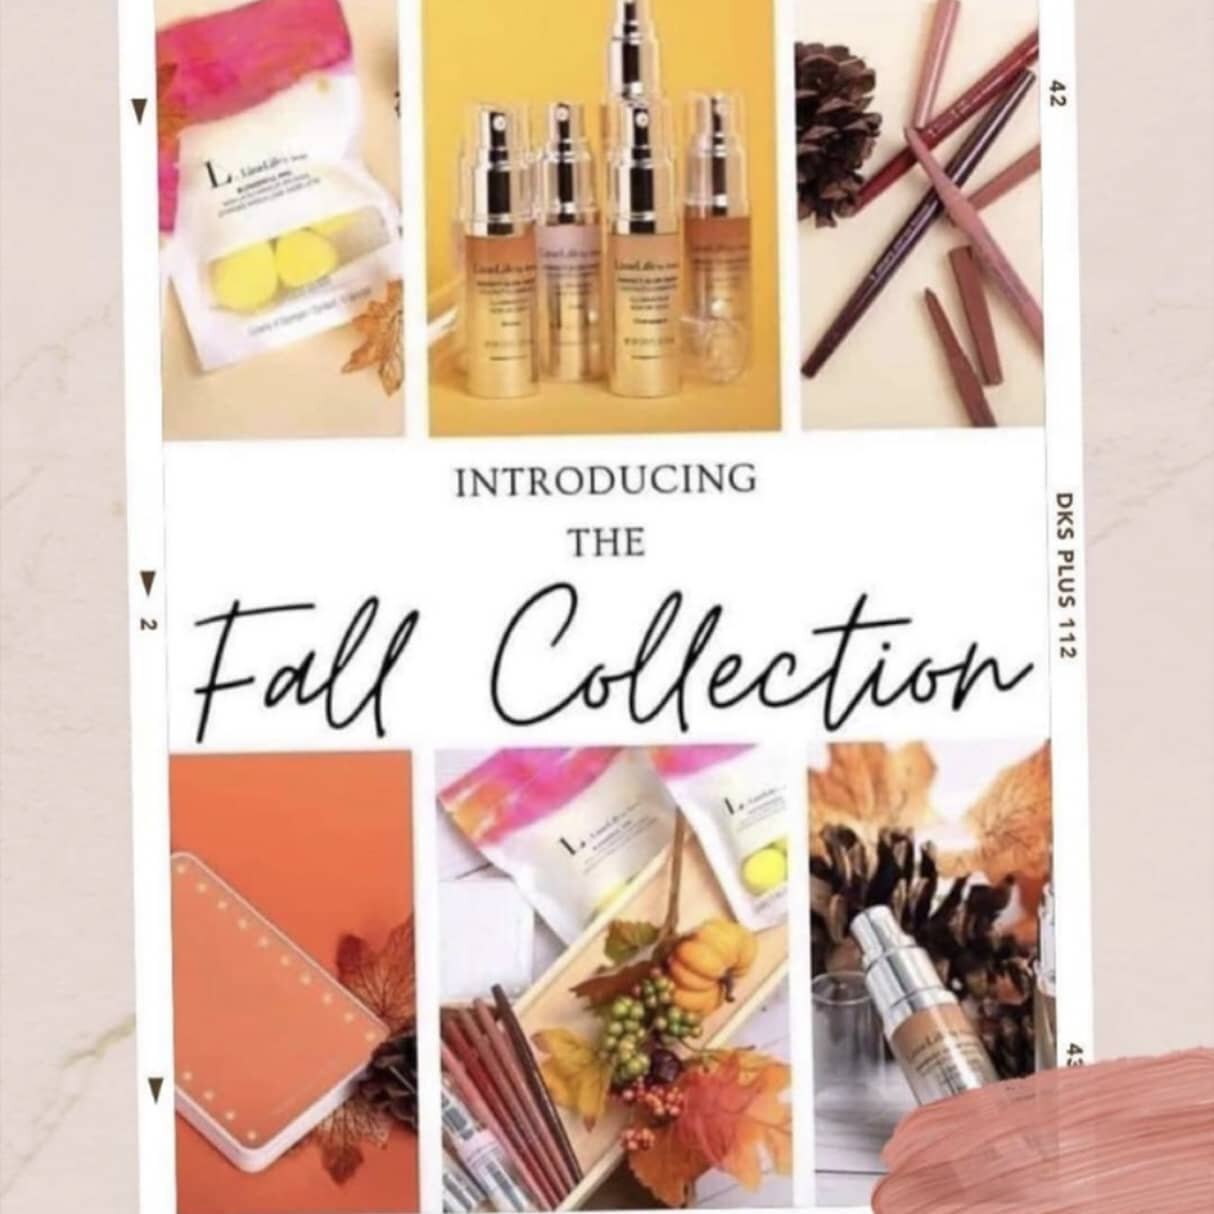 Today's the DAY! Our Fall launch is coming today! 🎃🍂🍁⁣
⁣
💋 5 new lip liners ⁣
🌟 3 new glow drops ⁣
🧽 2 new blenderful options ⁣
😍 Brand new Riki mirror ⁣
⁣
What are you excited to grab today? 🤩⁣
⁣
⁣
⁣
 #HappyJess #ReadyToGlowUp #SouthernGirl 